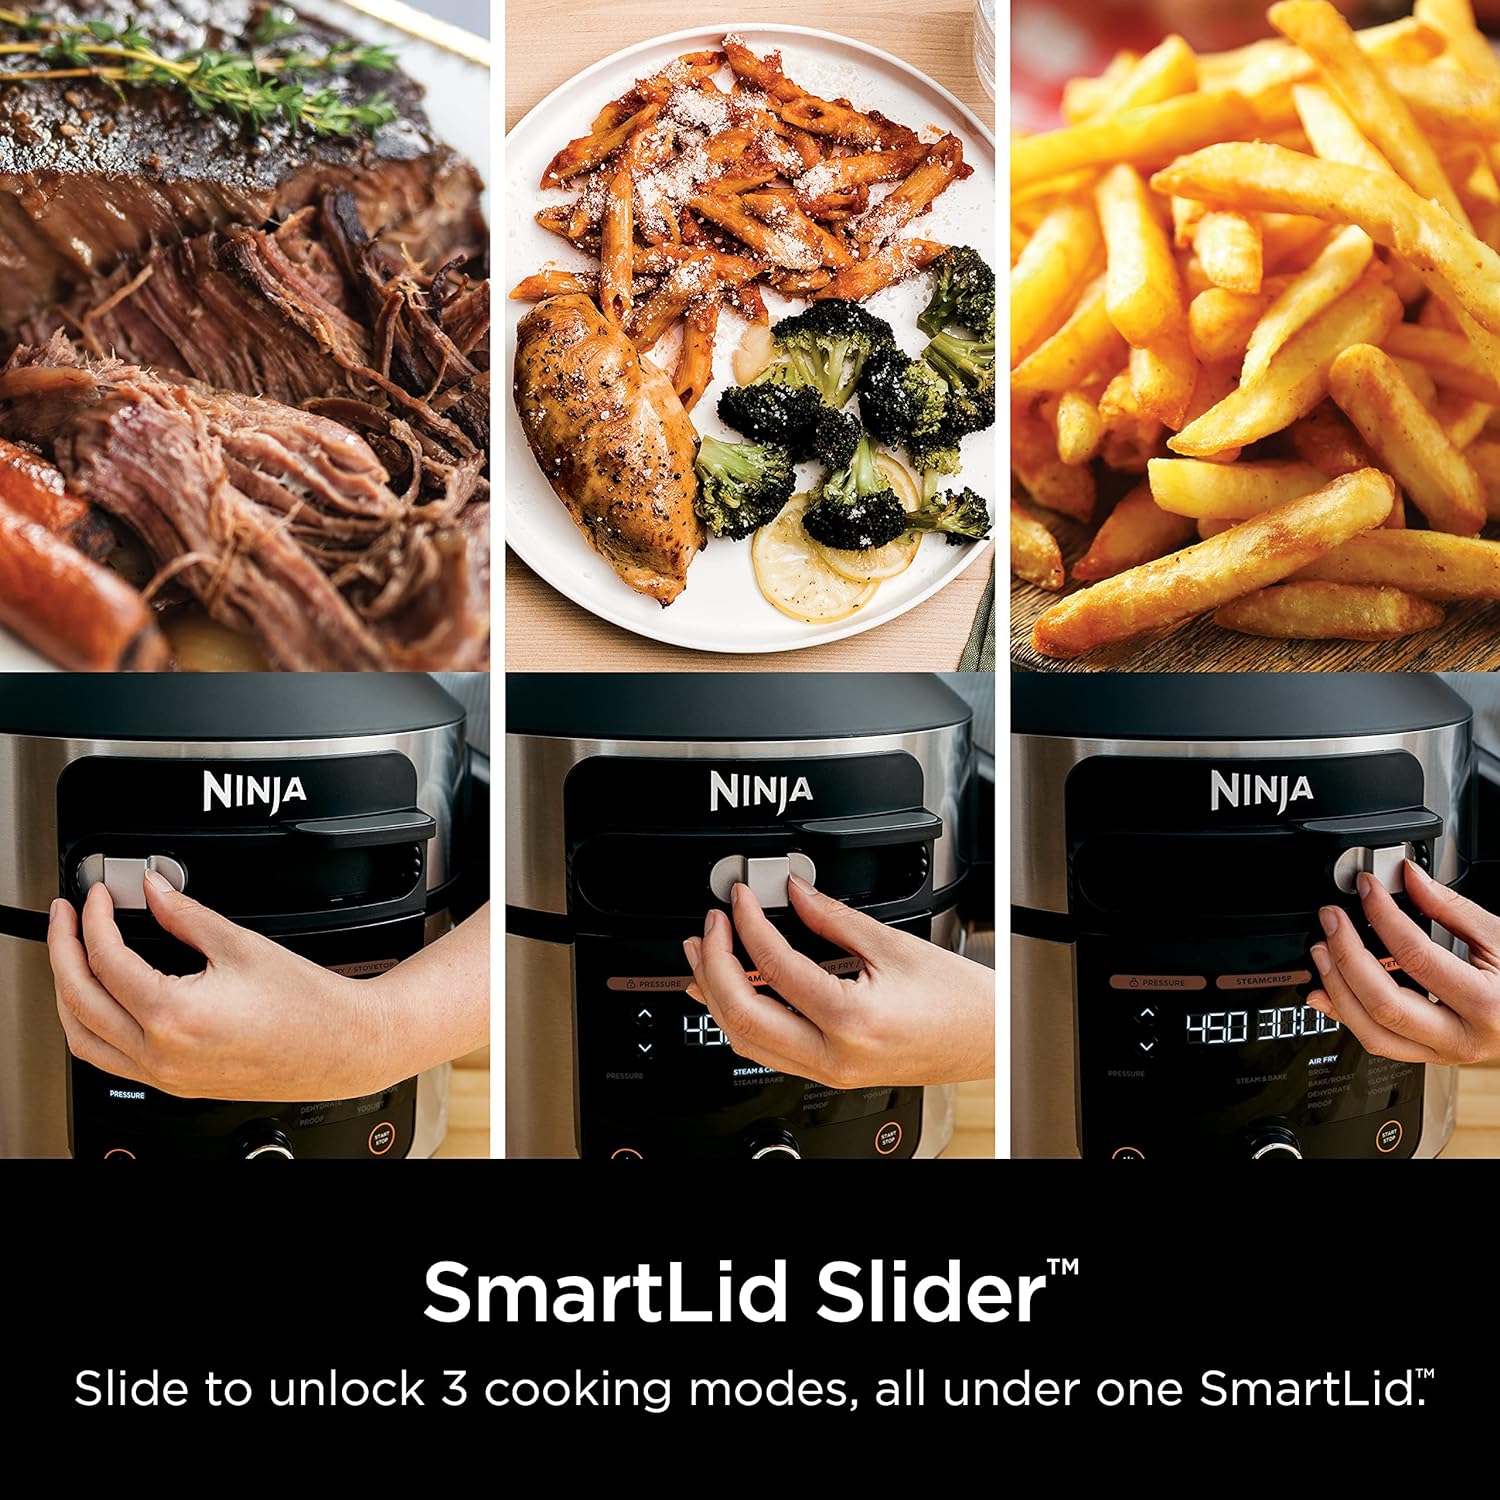 Ninja OL501 Foodi 6.5 Qt. Pressure Cooker Steam Fryer with SmartLid, 14-in-1 that Air Fries, Bakes  More, with 2-Layer Capacity  4.6 Qt. Crisp Plate, Silver/Black (Renewed)